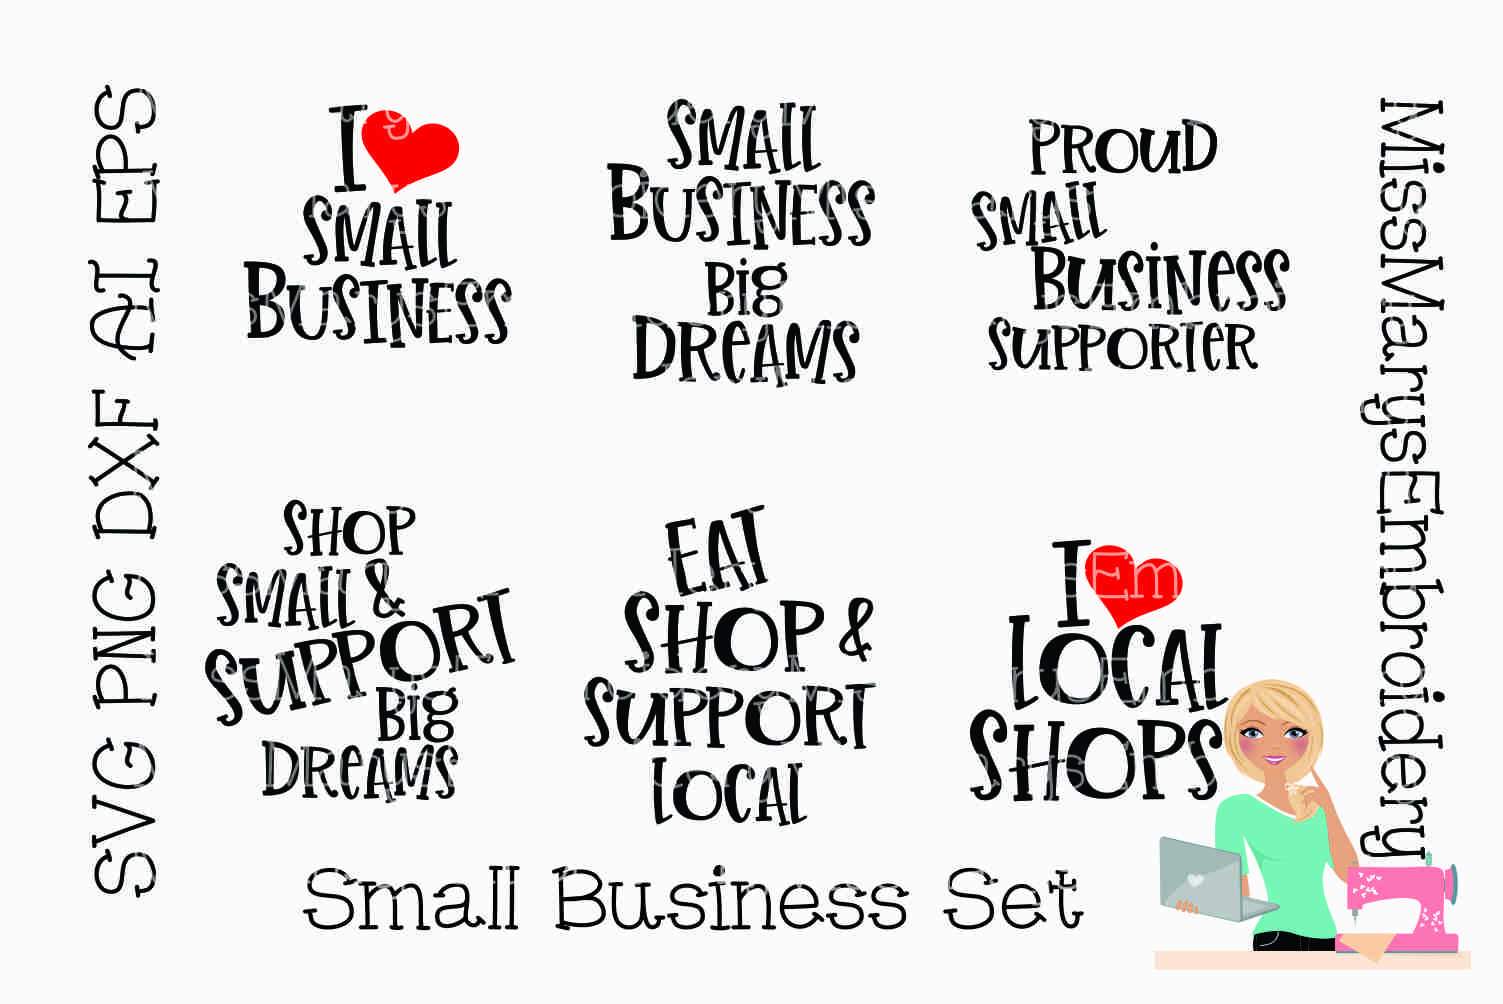 Download Craft Fair Small Business Svg File Small Shop Svg Cutting File For Silhouette Or Cricut Craft Fair Sign Craft Show Display Svg Craft Supplies Tools 3d Printing